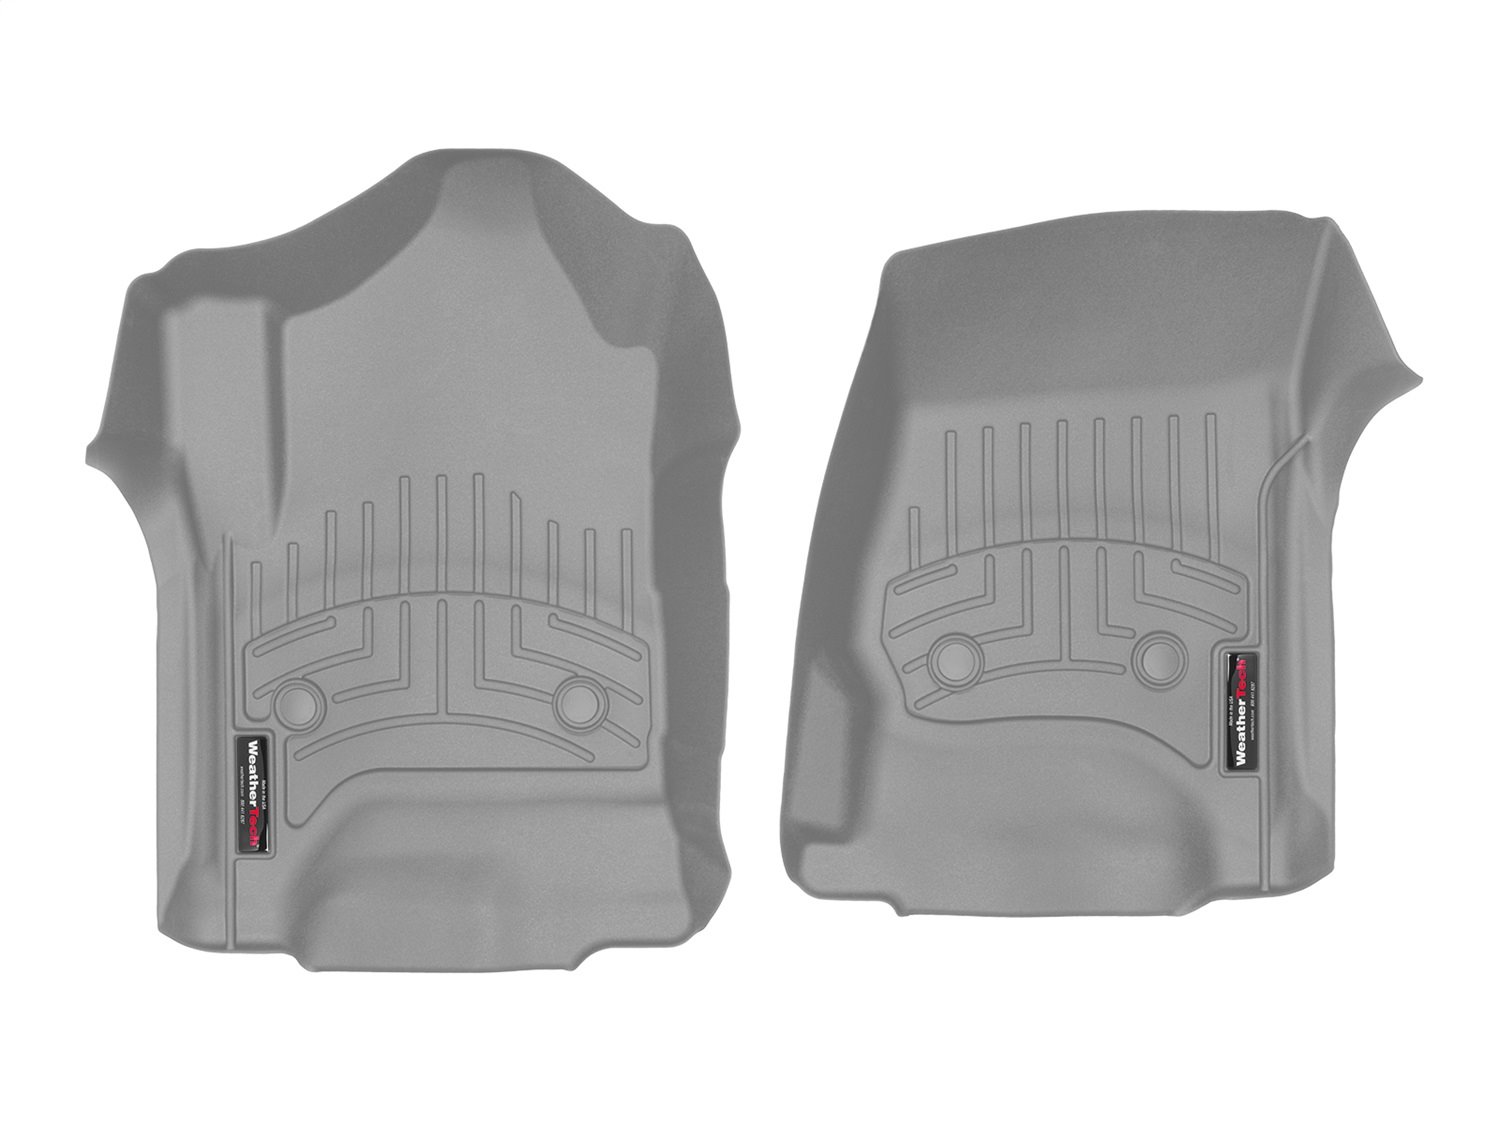 FRONT FLOORLINER GREY CHEVROLET SILVERADO 1500 2014-2017 FITS VEHICLES WITH THE FLOOR-MOUNTED SHIFTE